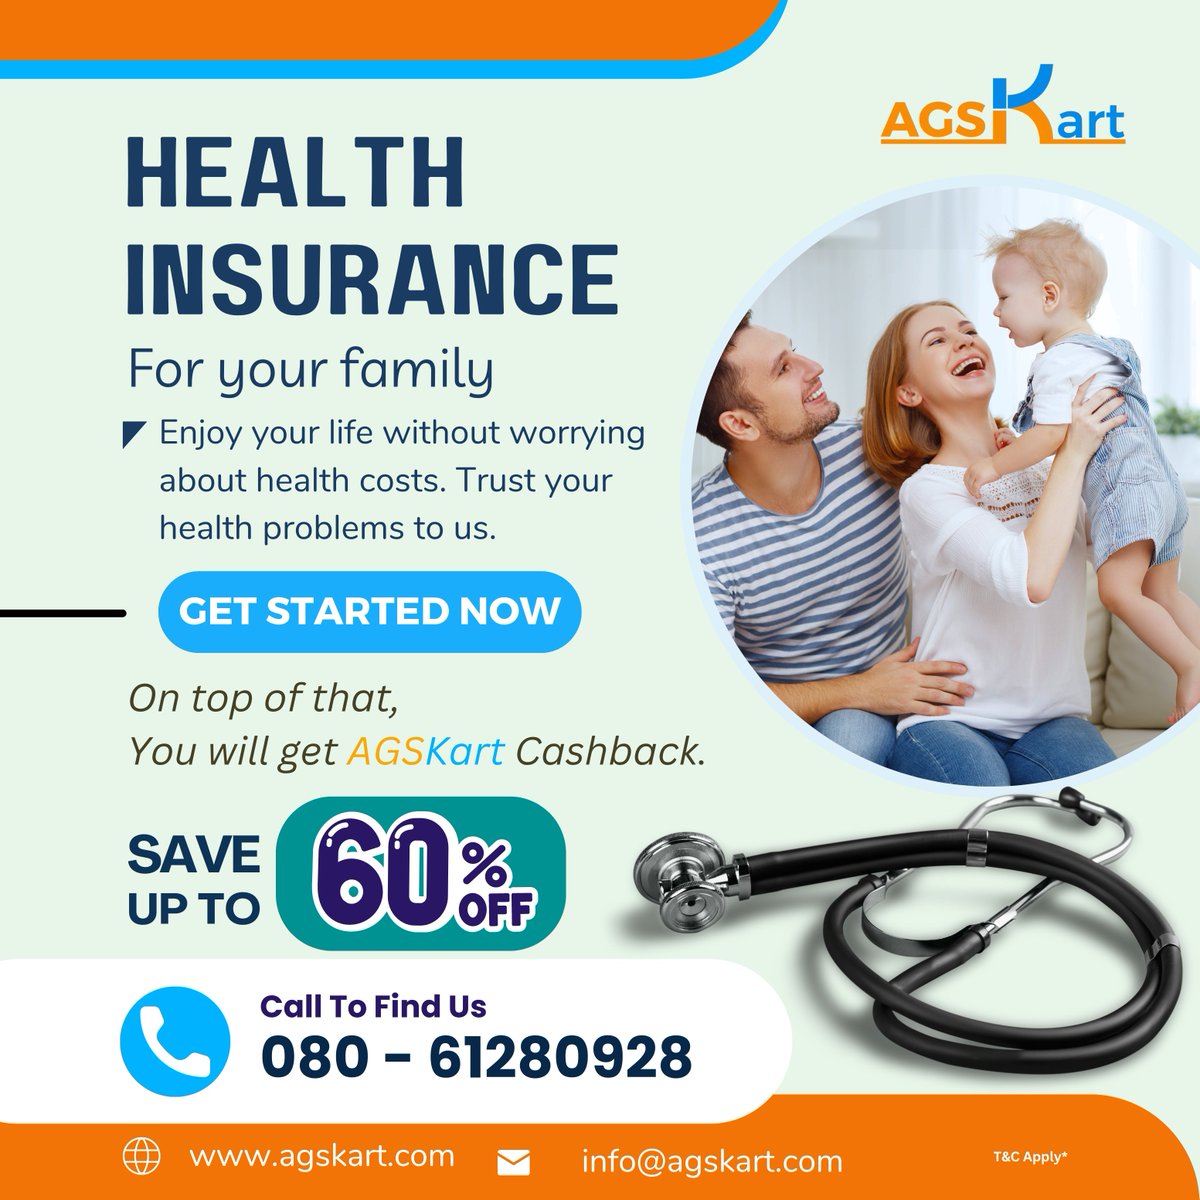 'Get Your Health insurance Today '
and Save Upto 60% off.
#lifeinsurance #insurance #insure #life #insurancesolutions #insuranceservices #insurances #healthinsurance #allinsurance #allininsurance #cashback #reward #rewardpoints #health #healthylifestyle